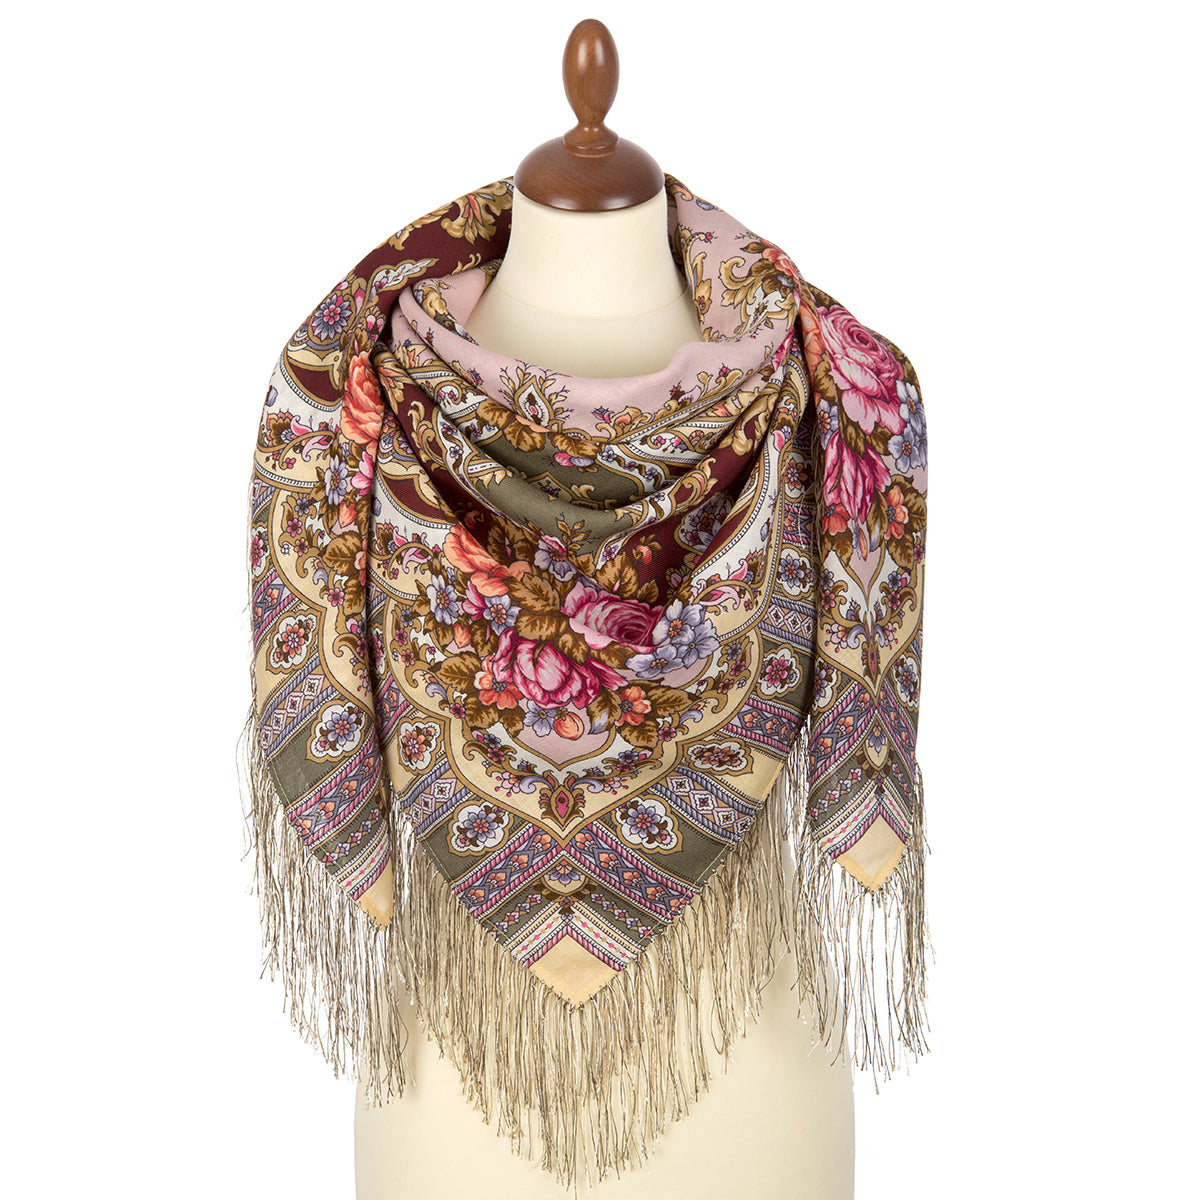 Shawl  "Mysterious Image"